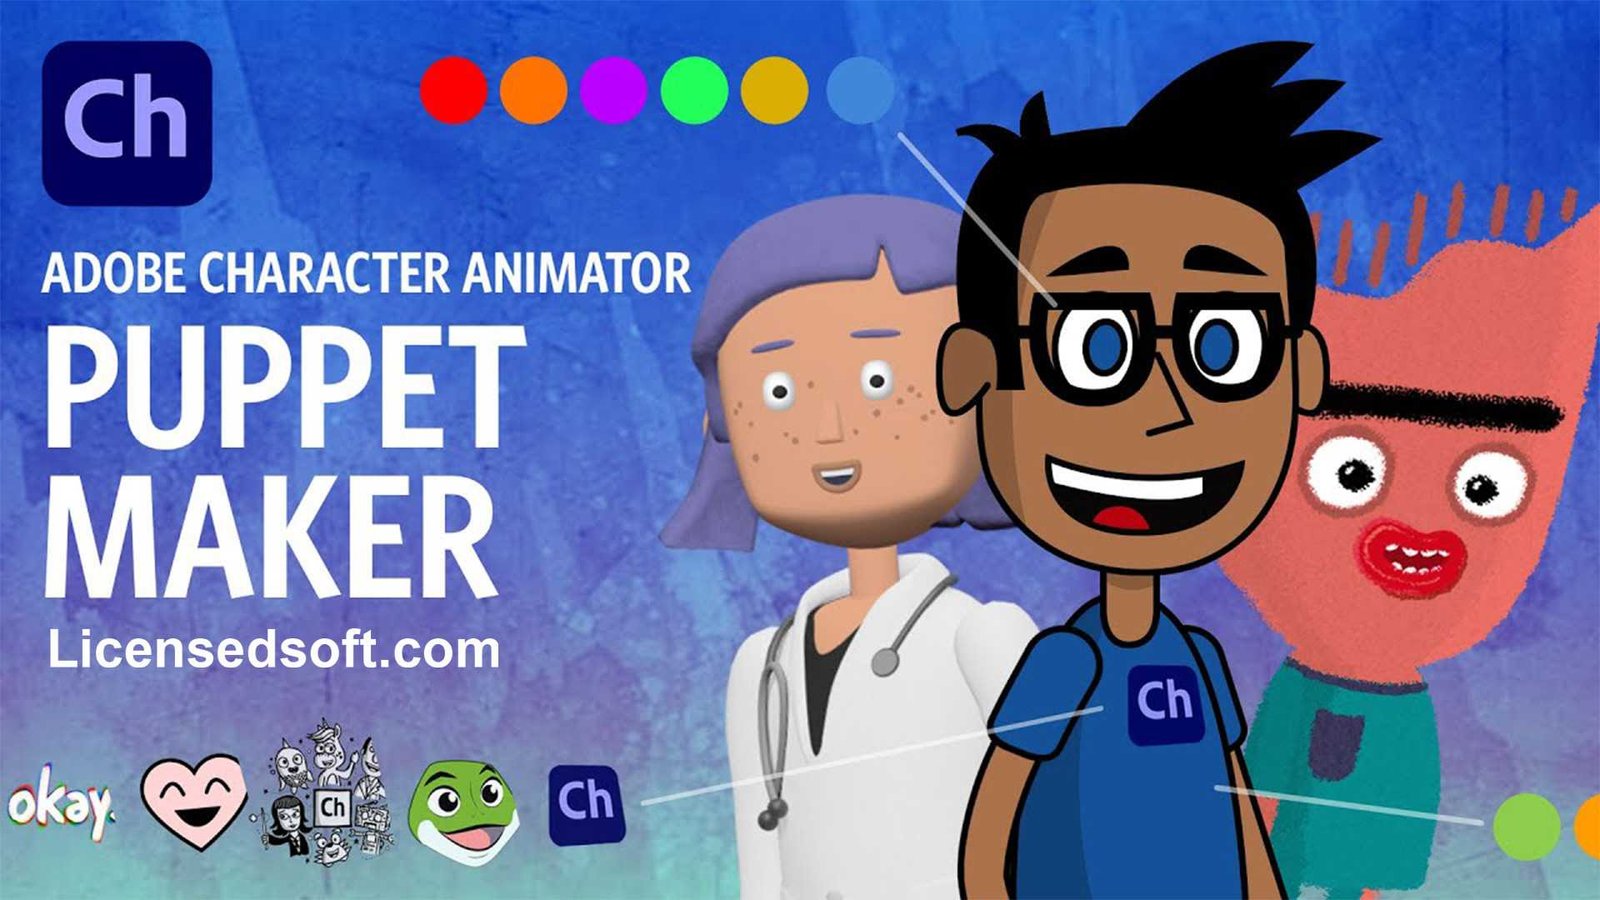 Adobe Character Animator 2024 Full Version v24.0 For Mac cover photo by licensedsoft.com